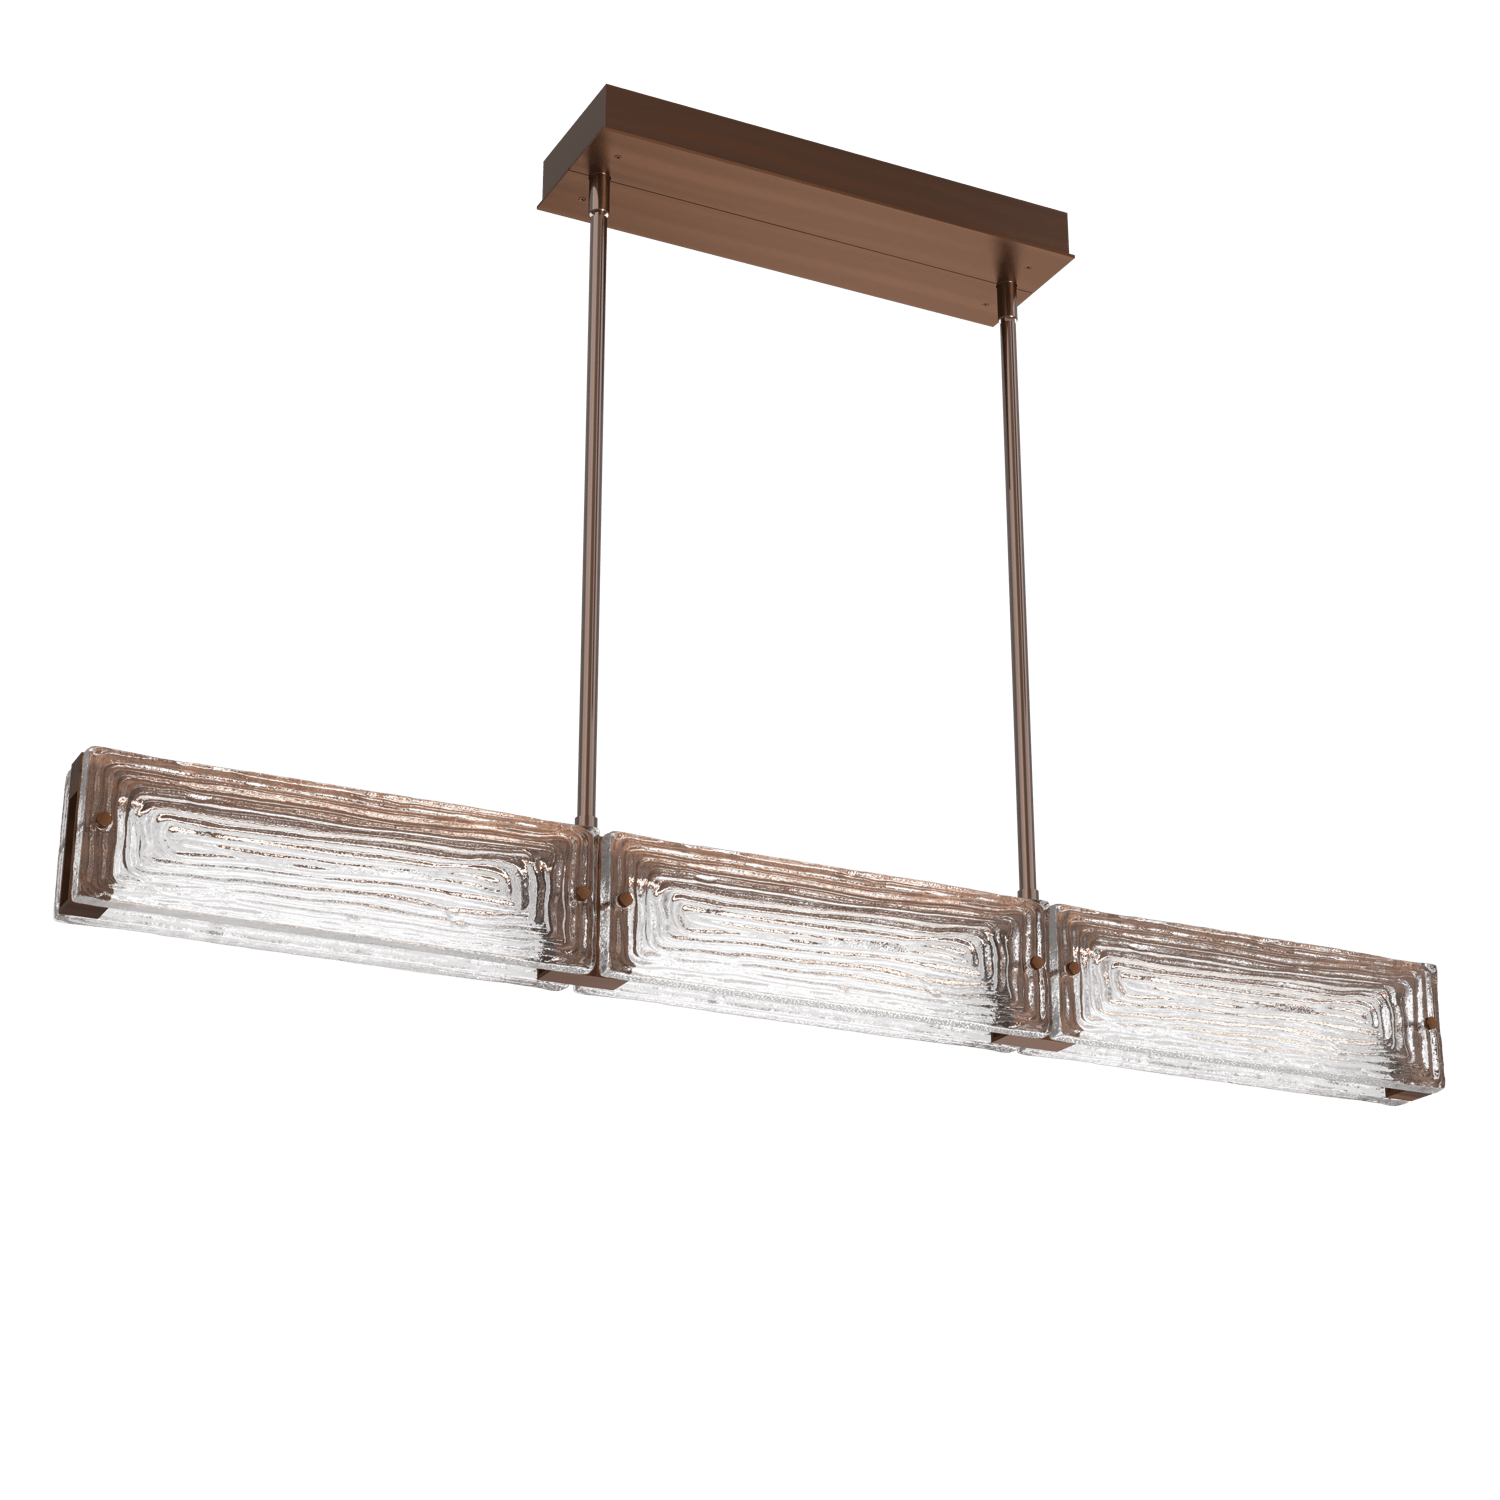 PLB0090-43-RB-TL-Hammerton-Studio-Tabulo-43-inch-linear-chandelier-with-oil-rubbed-bronze-finish-and-clear-linea-cast-glass-shade-and-LED-lamping